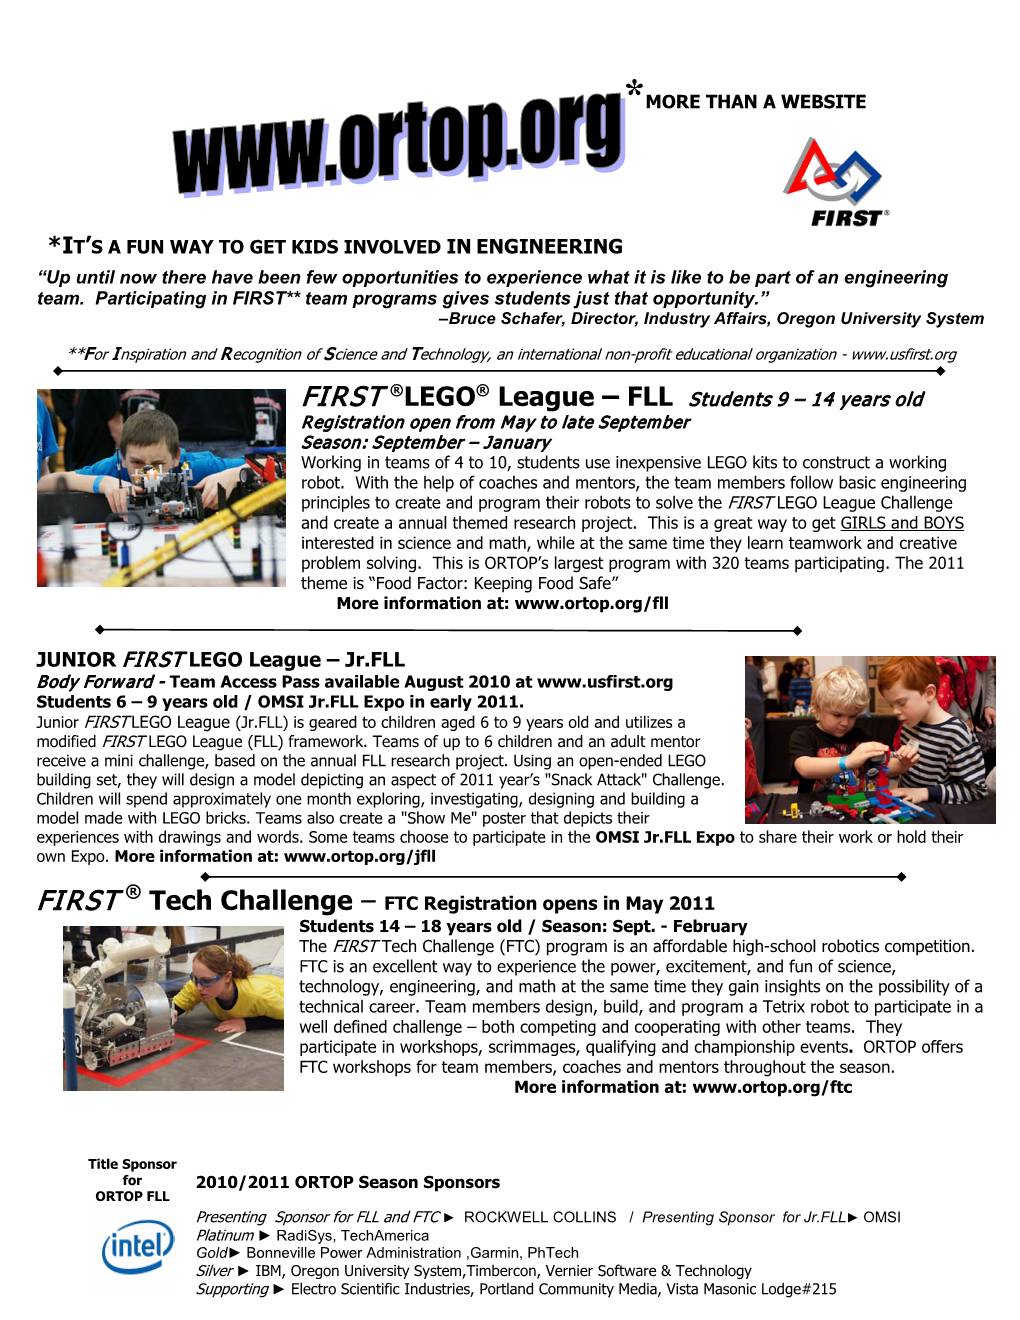 JUNIOR FIRST LEGO League – Jr.FLL Body Forward - Team Access Pass Available August 2010 at Students 6 – 9 Years Old / OMSI Jr.FLL Expo in Early 2011